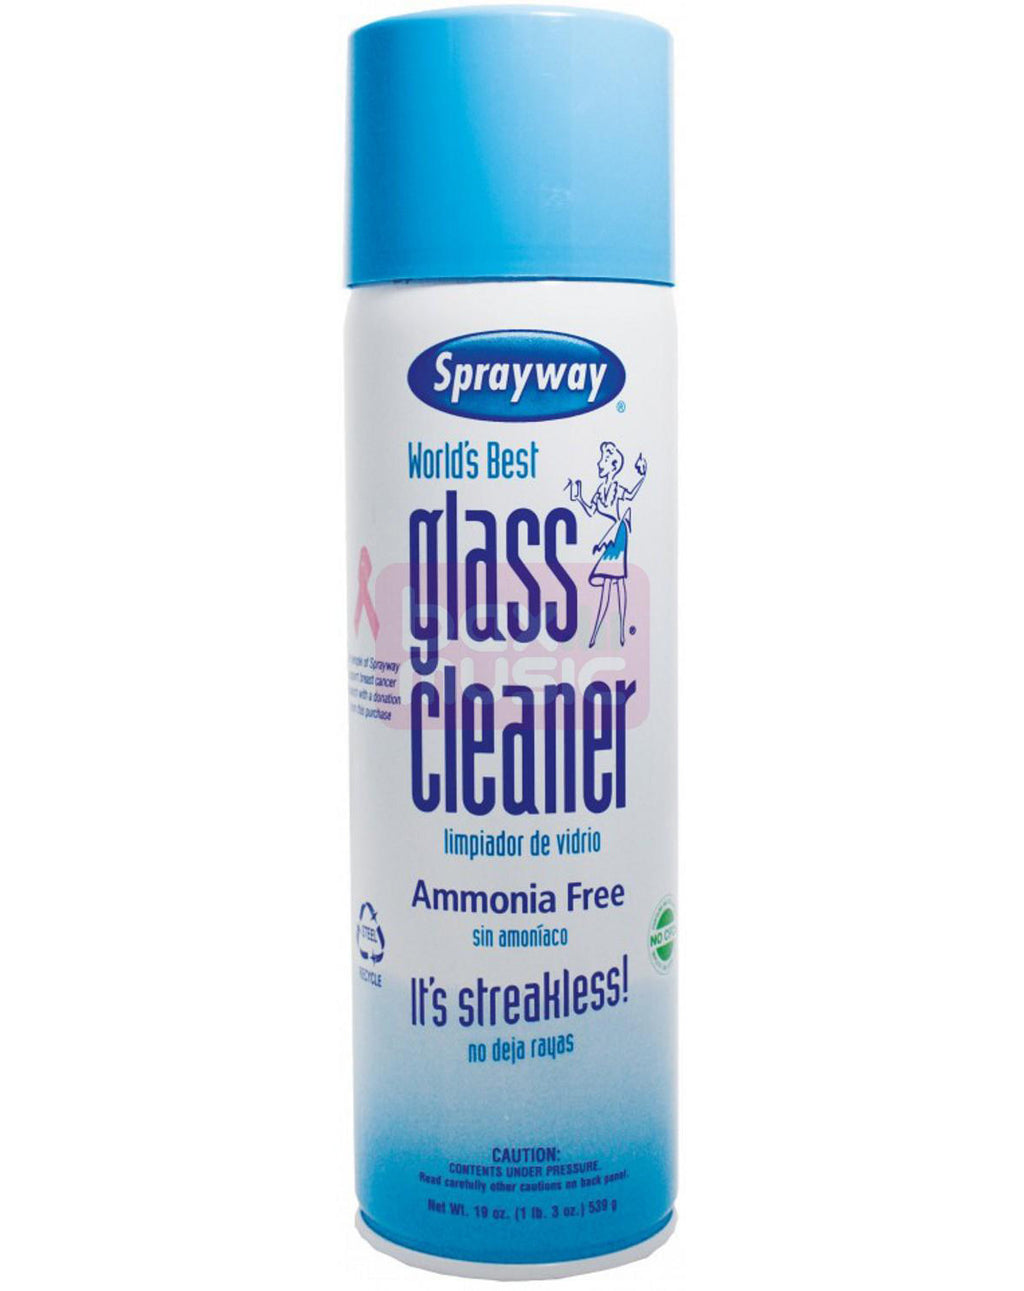 Sprayway 23 oz. Glass Cleaner (3-pack)